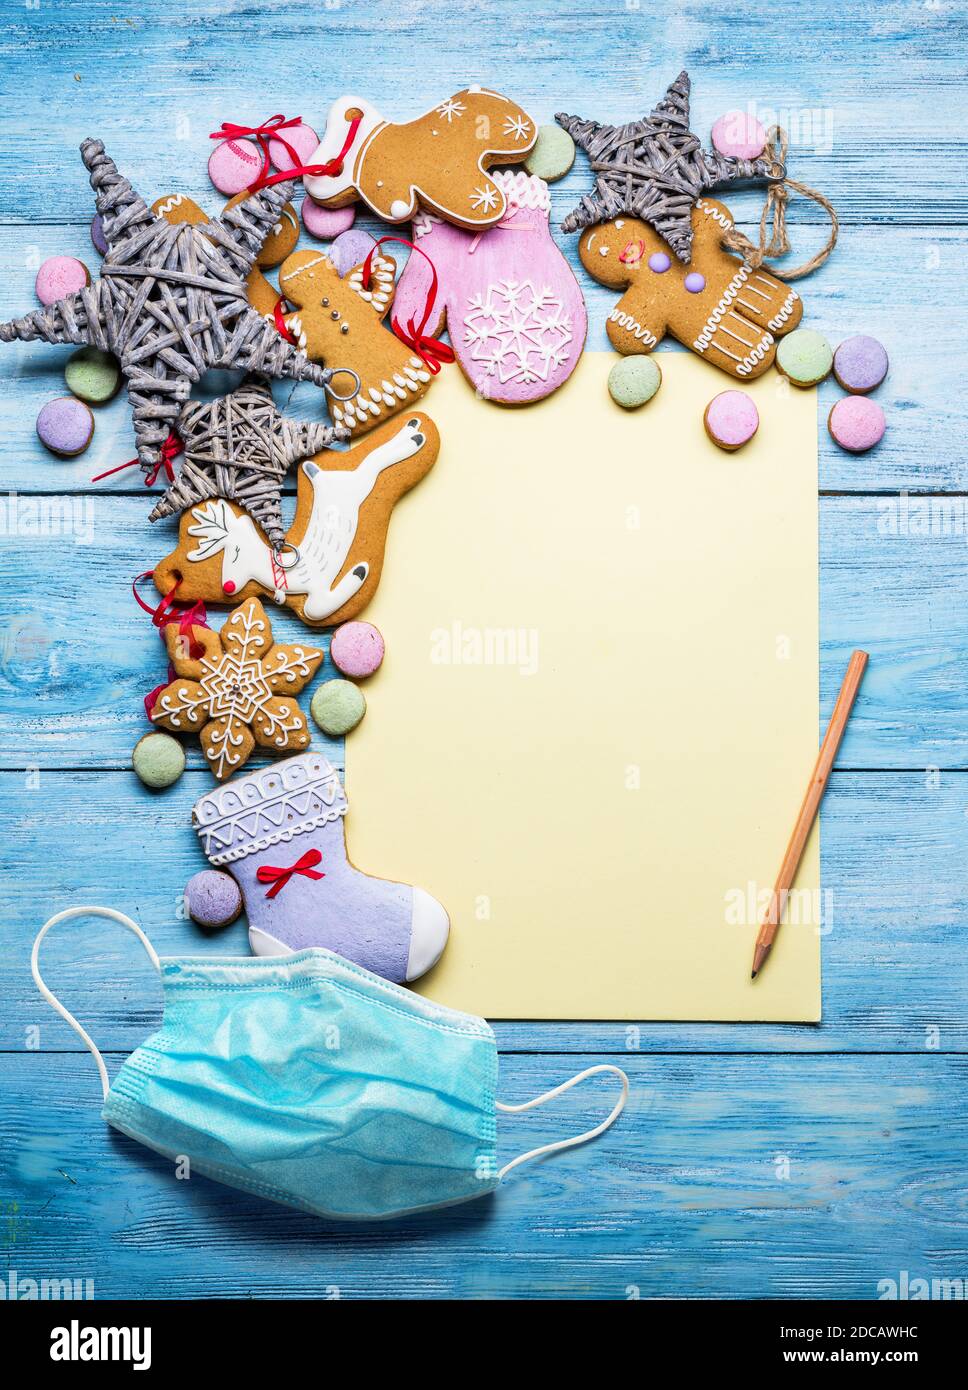 Empty Santa letter with Christmas traditional ginger cookies around it on wooden background. Medical mask is a permanent attribute of people. Stock Photo